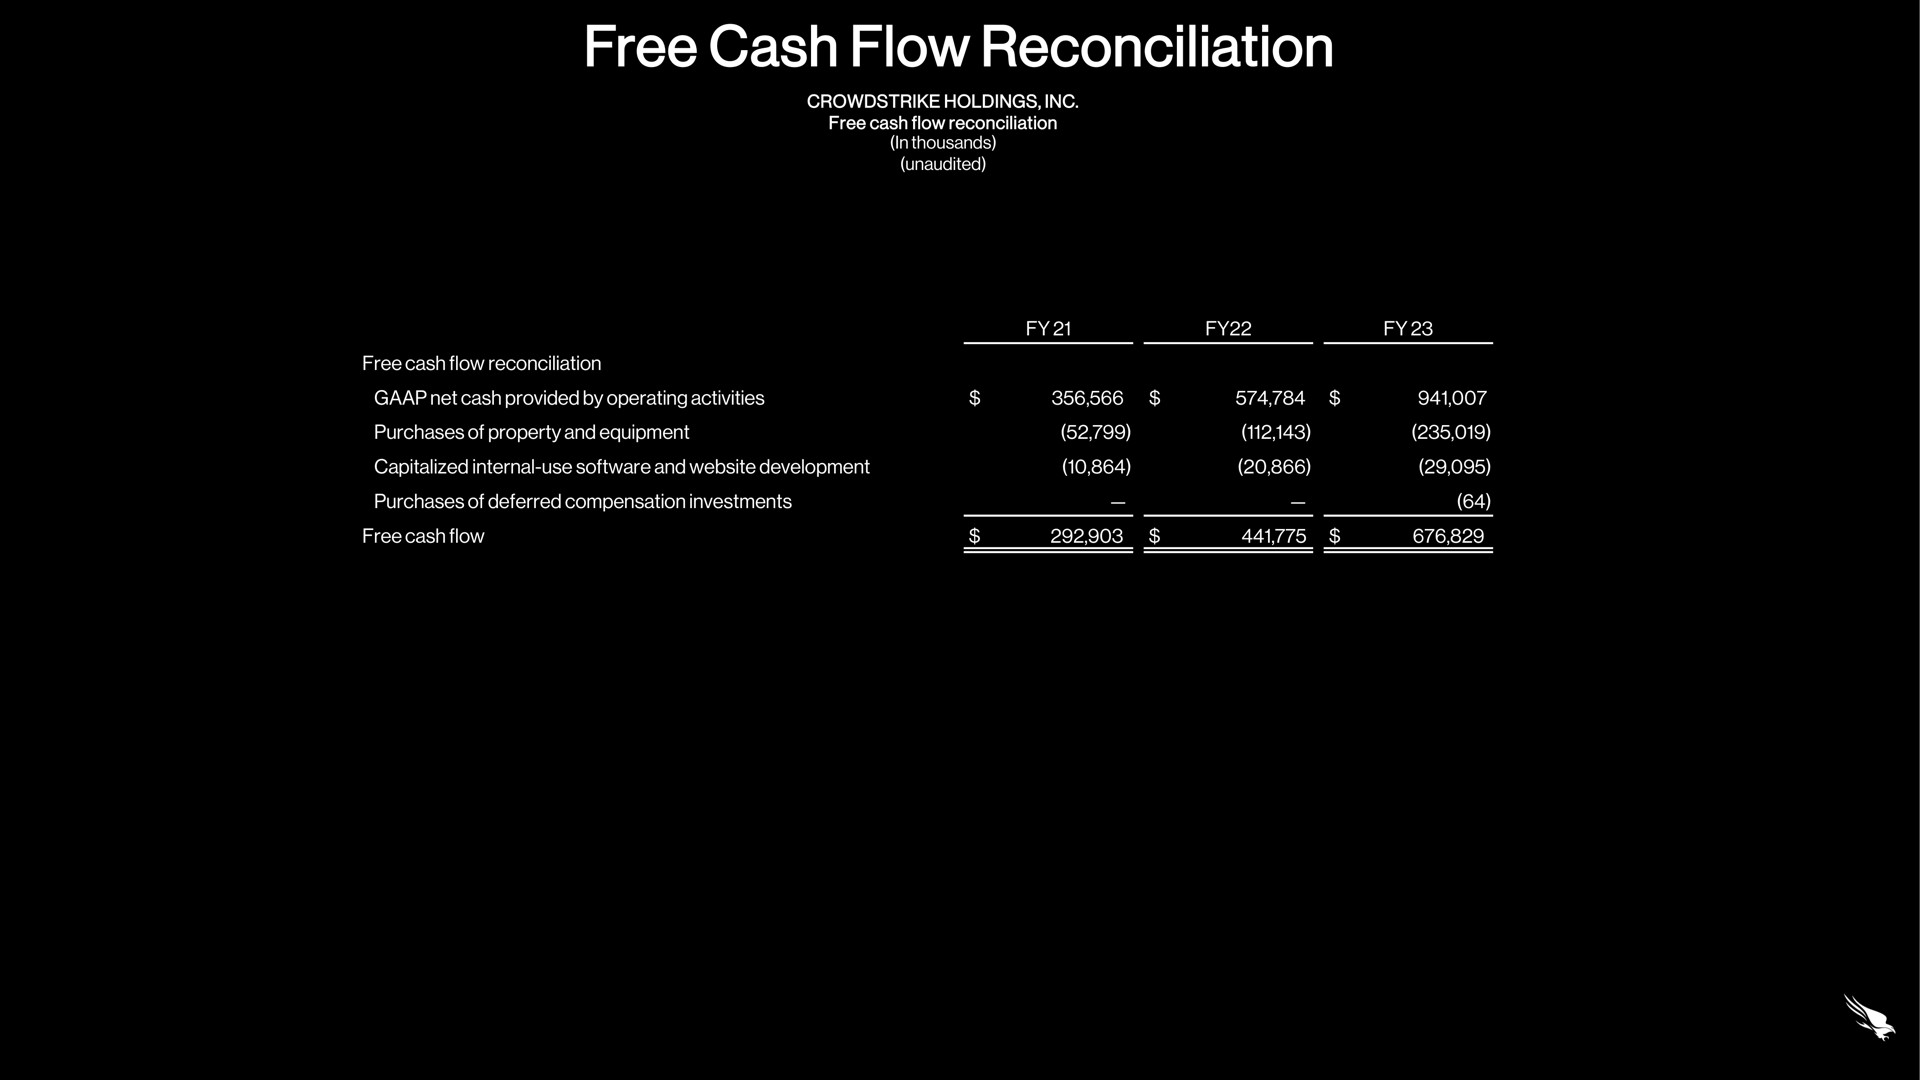 free cash flow reconciliation free cash flow reconciliation net cash provided by operating activities purchases of property and equipment capitalized internal use and development purchases of deferred compensation investments free cash flow | Crowdstrike